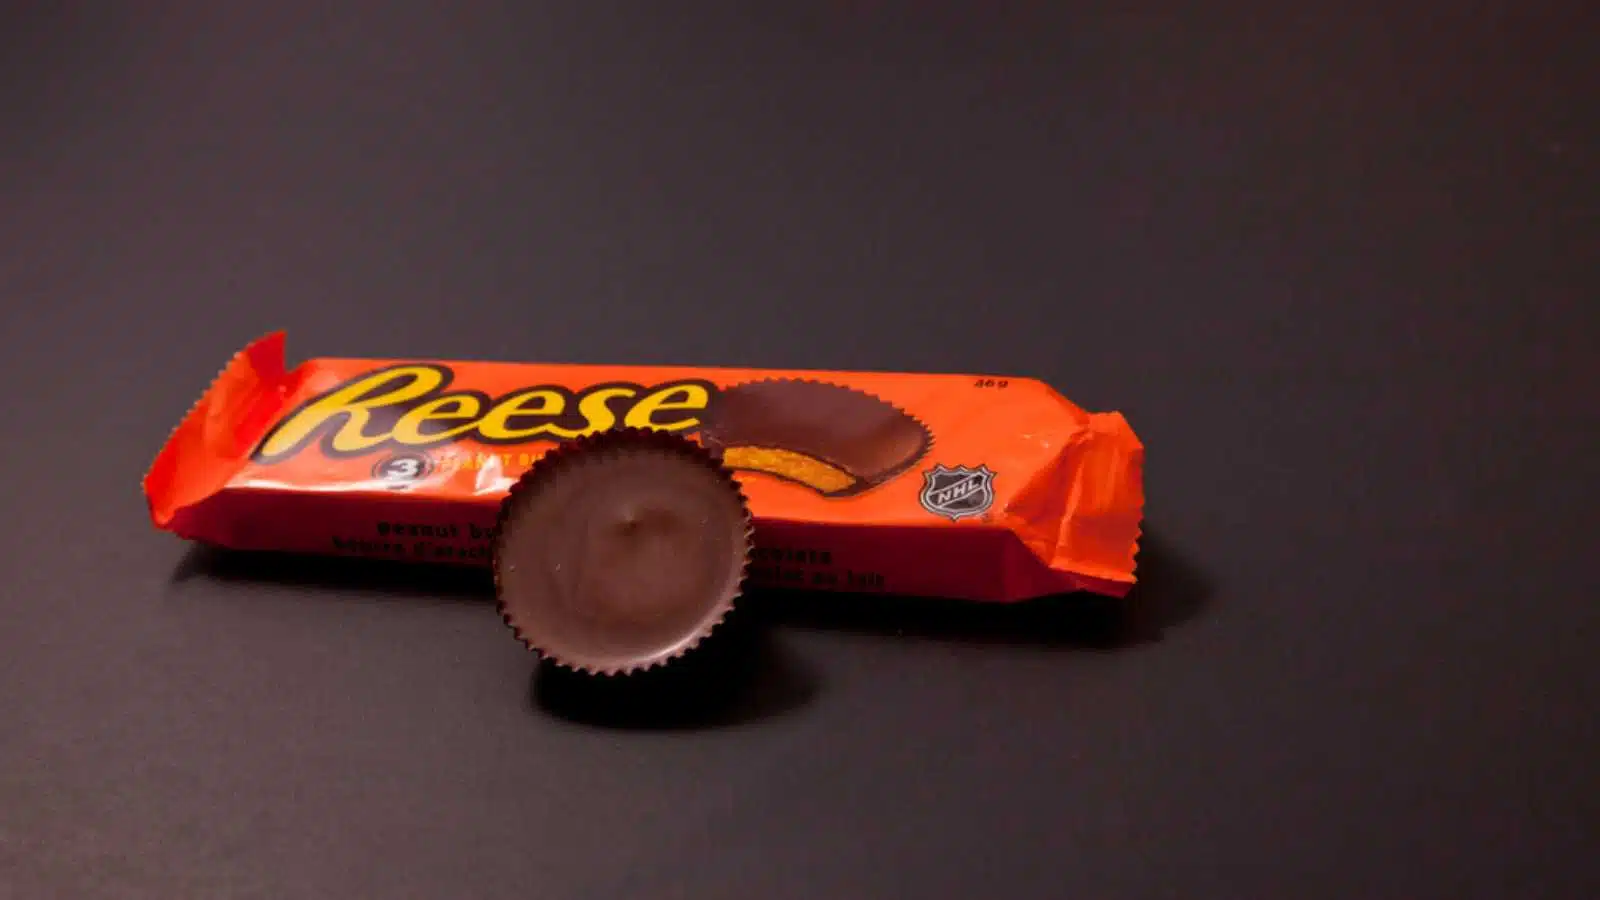 Reese’s peanut butter cup